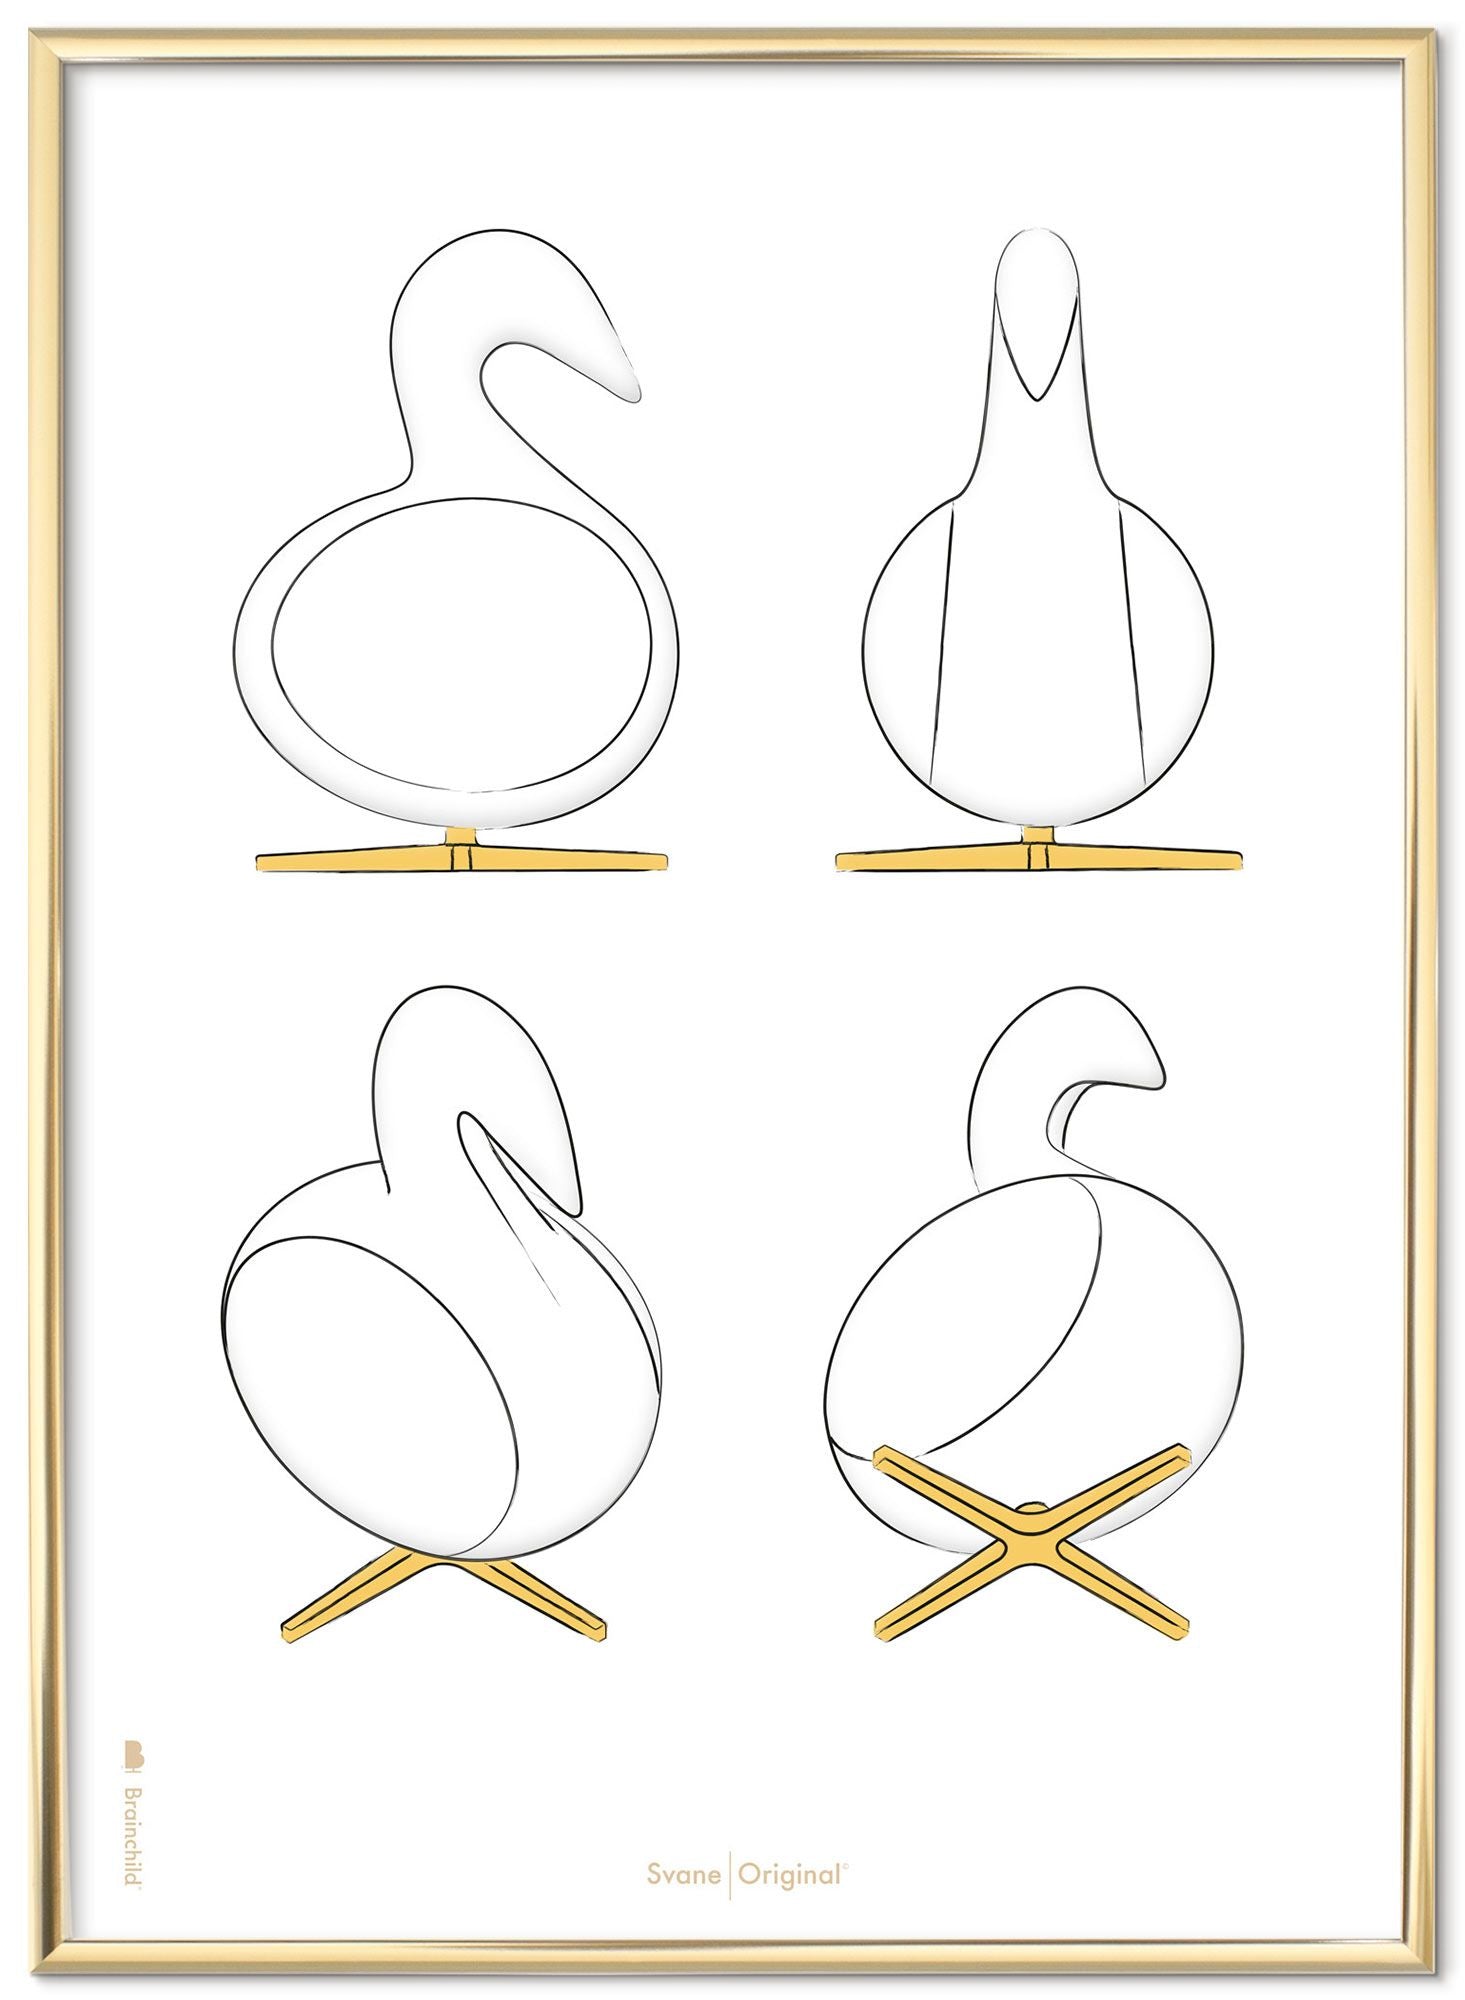 Brainchild Swan Design Sketches Poster Frame Made Of Brass Colored Metal 70x100 Cm, White Background